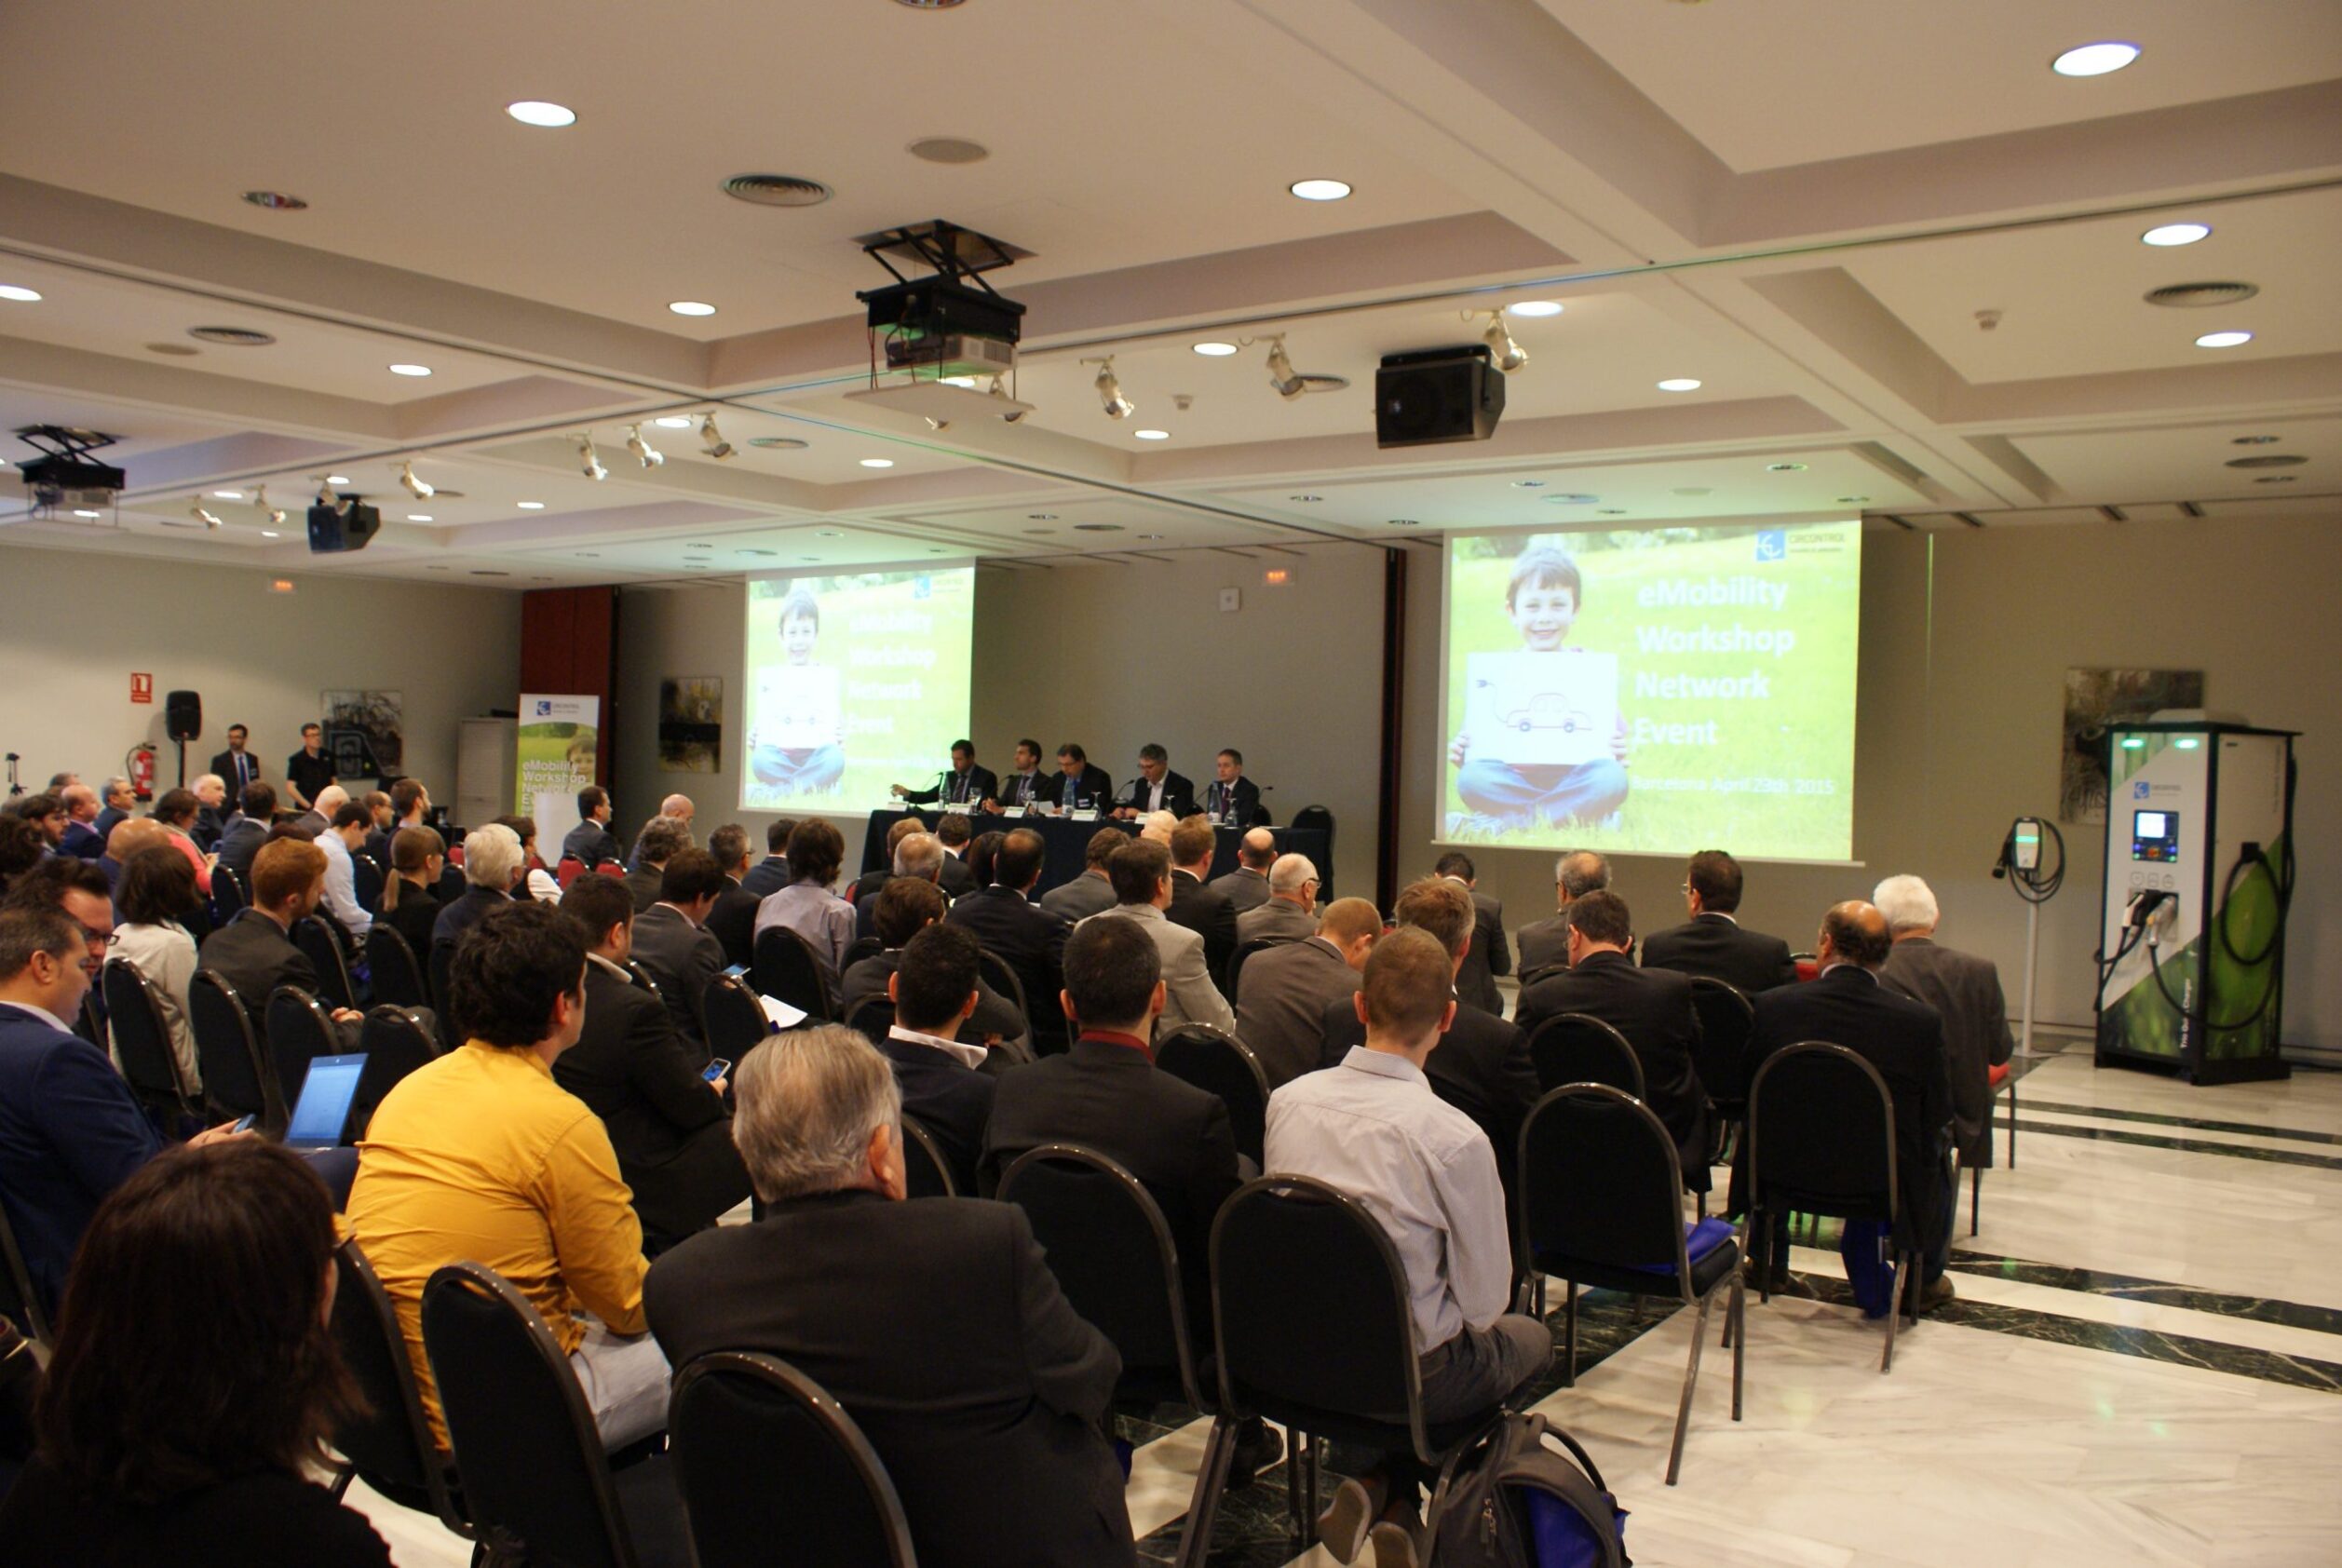 The eMobility Workshop Network Event by Circontrol brings over hundred experts to discuss about electric vehicles